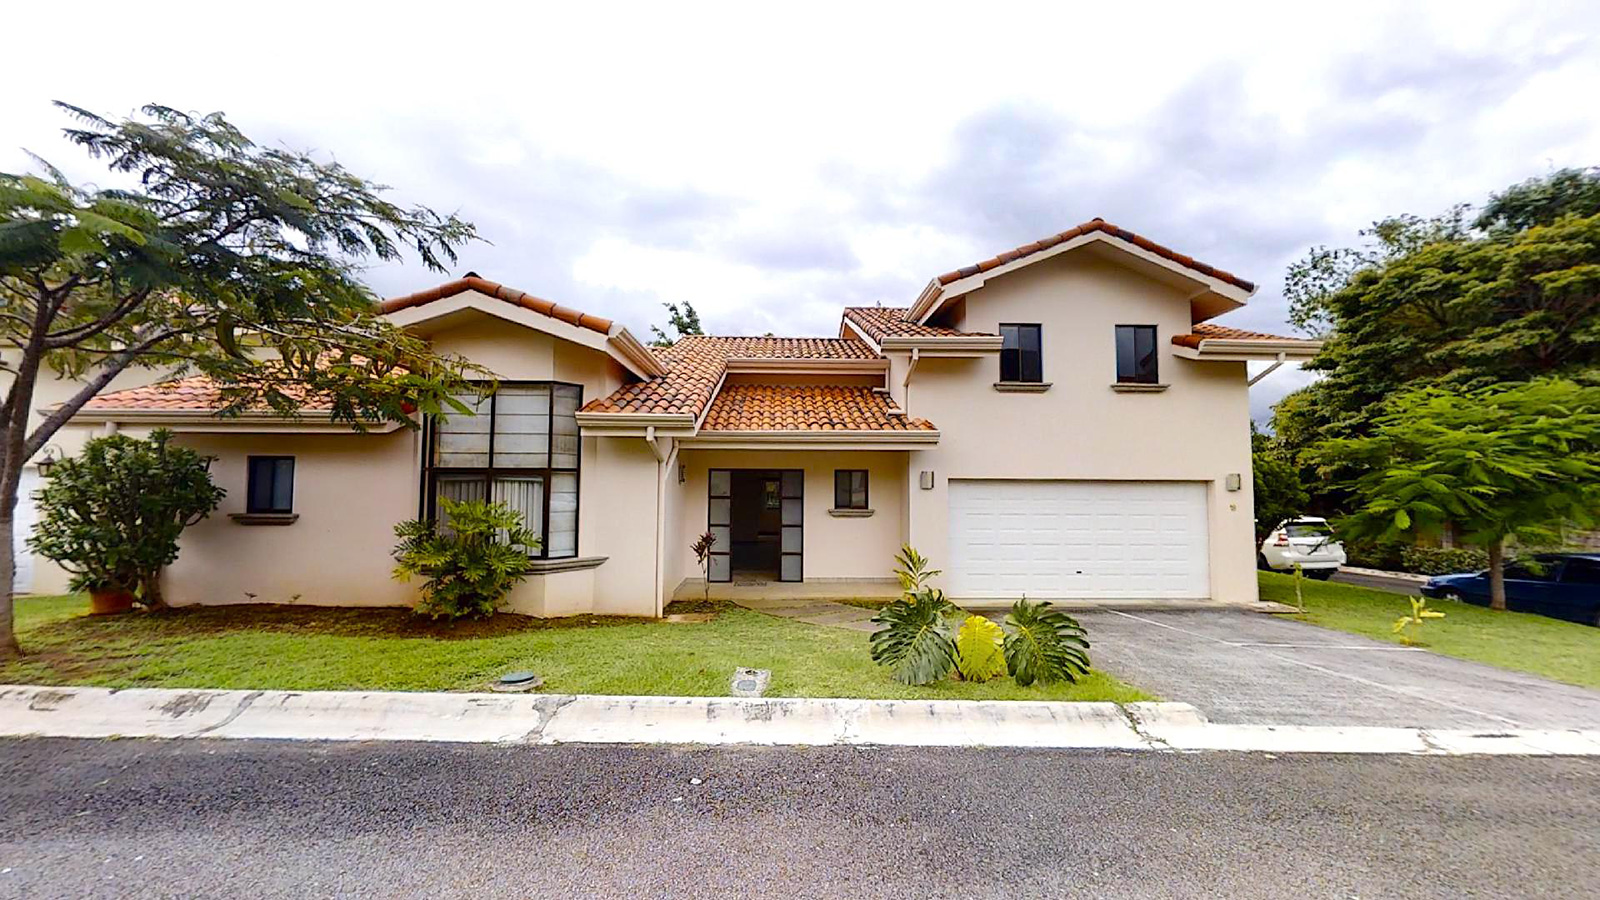 Santa Ana Priced to Sell Home in Gated Community with Pool